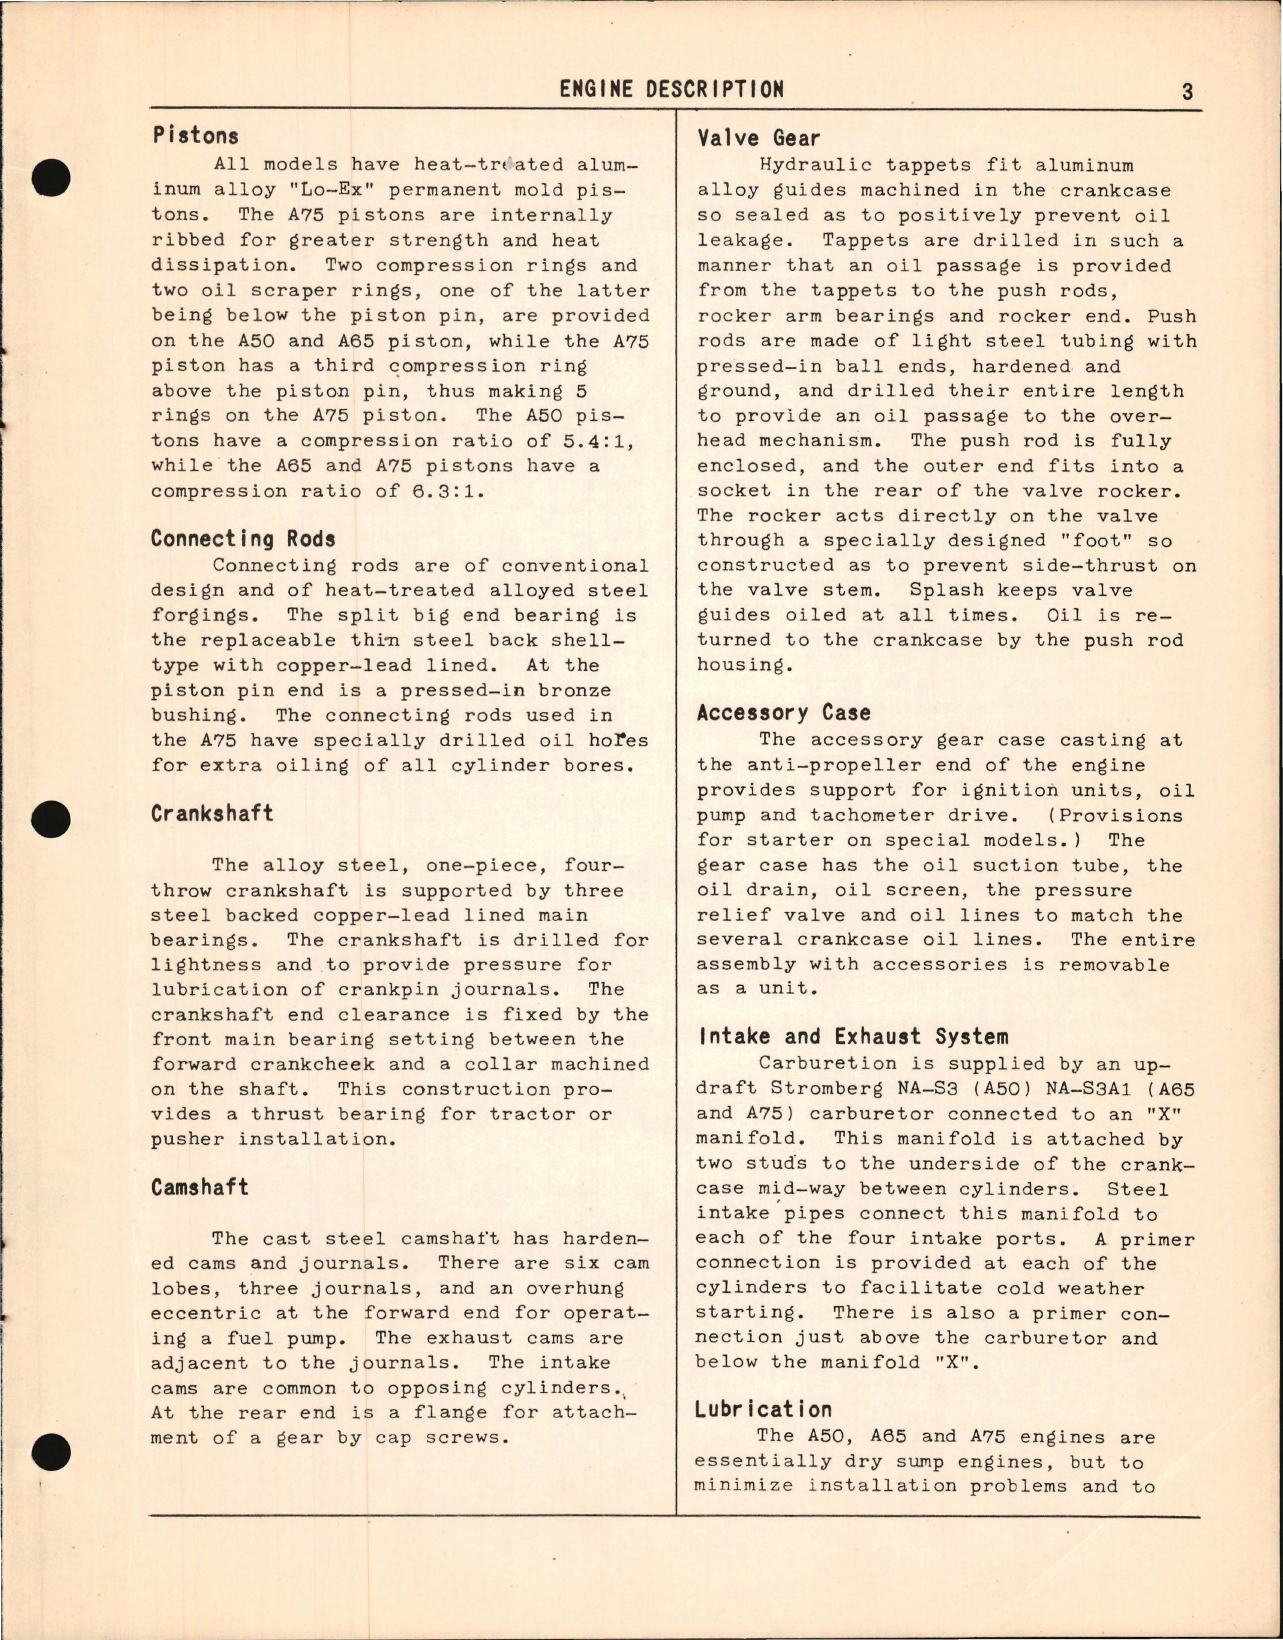 Sample page 7 from AirCorps Library document: Operators Handbook for Continental A-50, A-65, and A-75 Series Engines